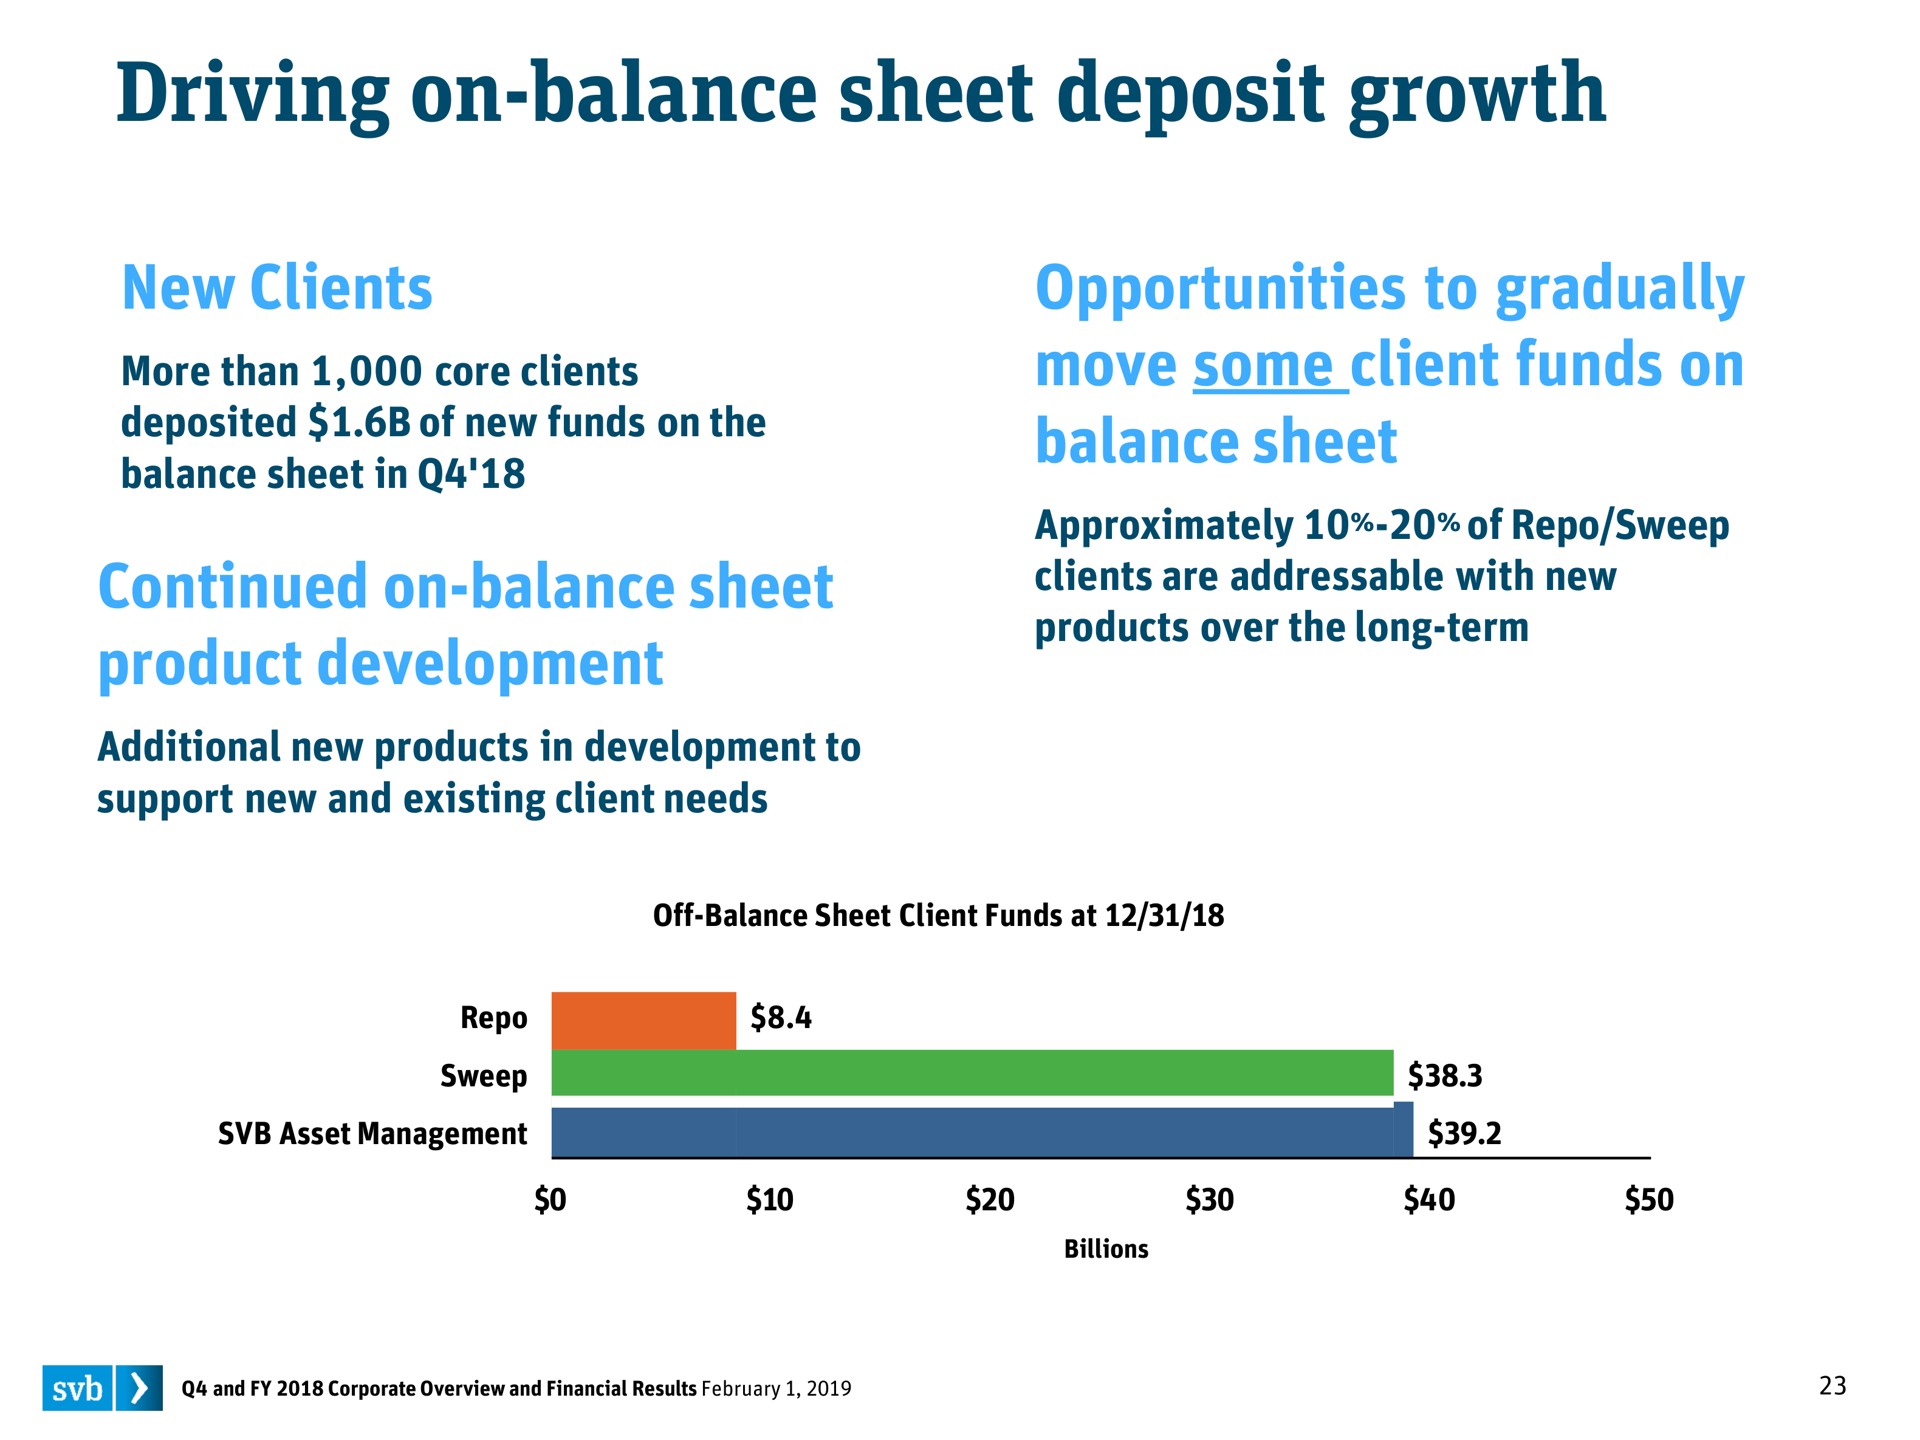 driving on balance sheet deposit growth new clients continued on balance sheet product development opportunities to gradually move some client funds on balance sheet | Silicon Valley Bank